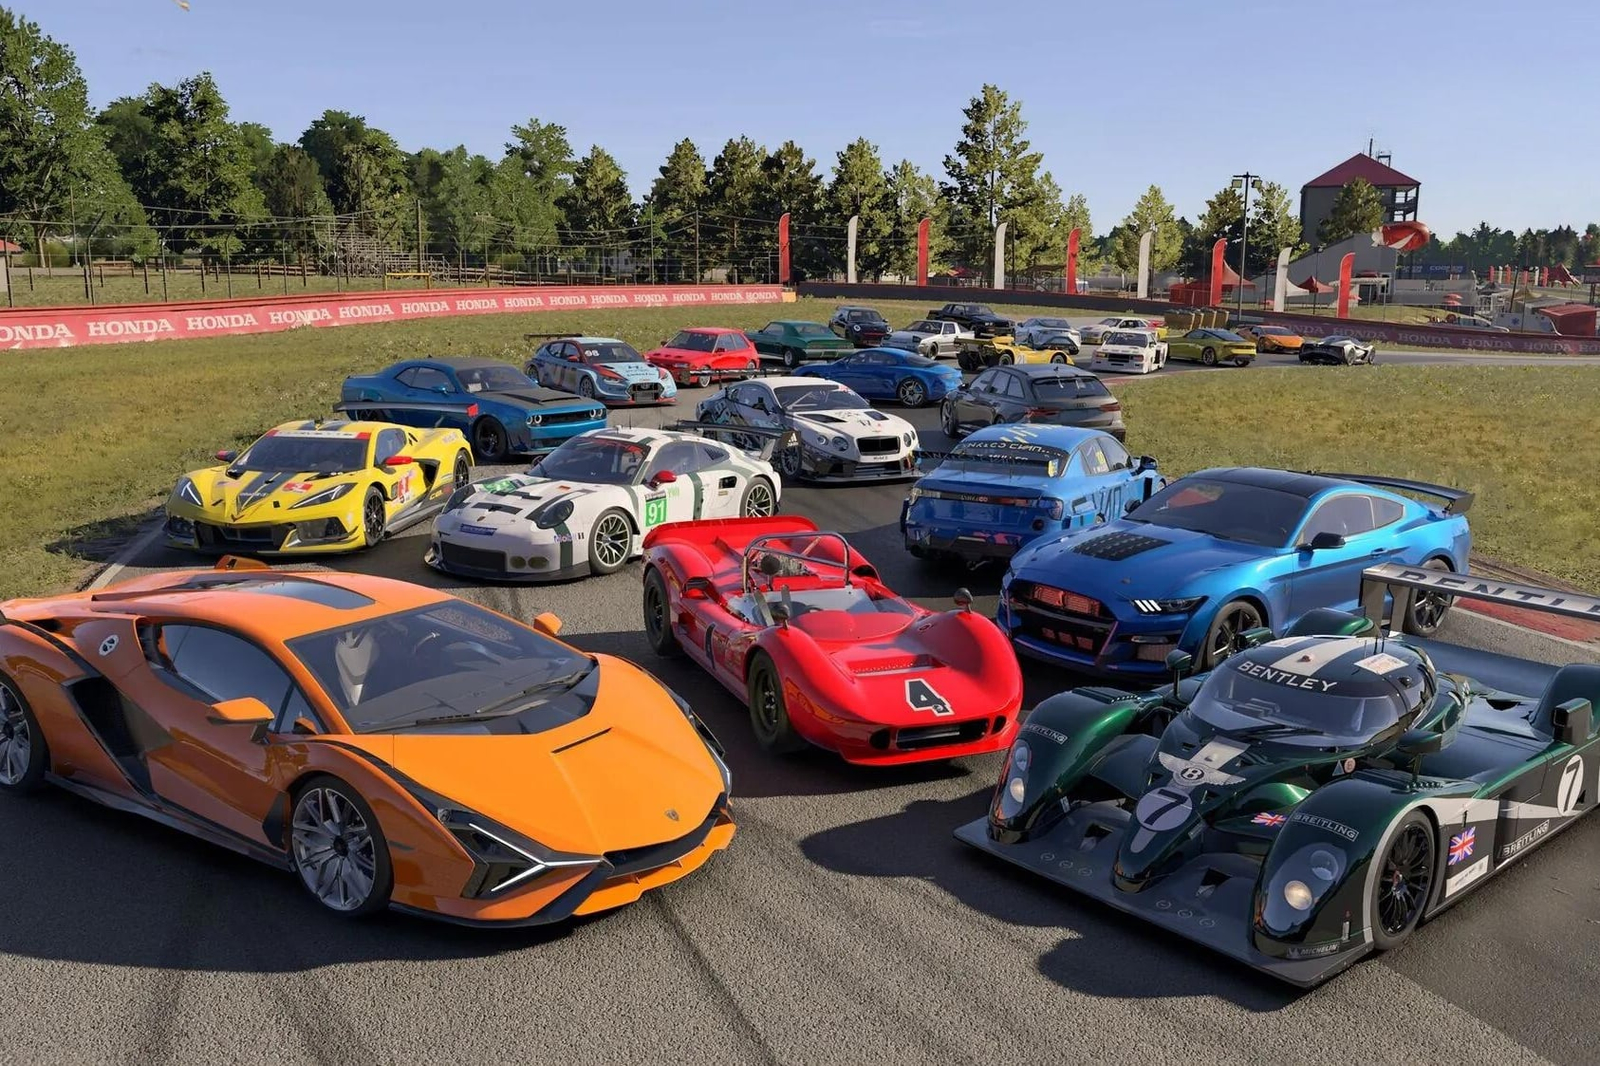 offbeat, movies & tv, forza motorsports' ai opponents could race smarter and cleaner than people